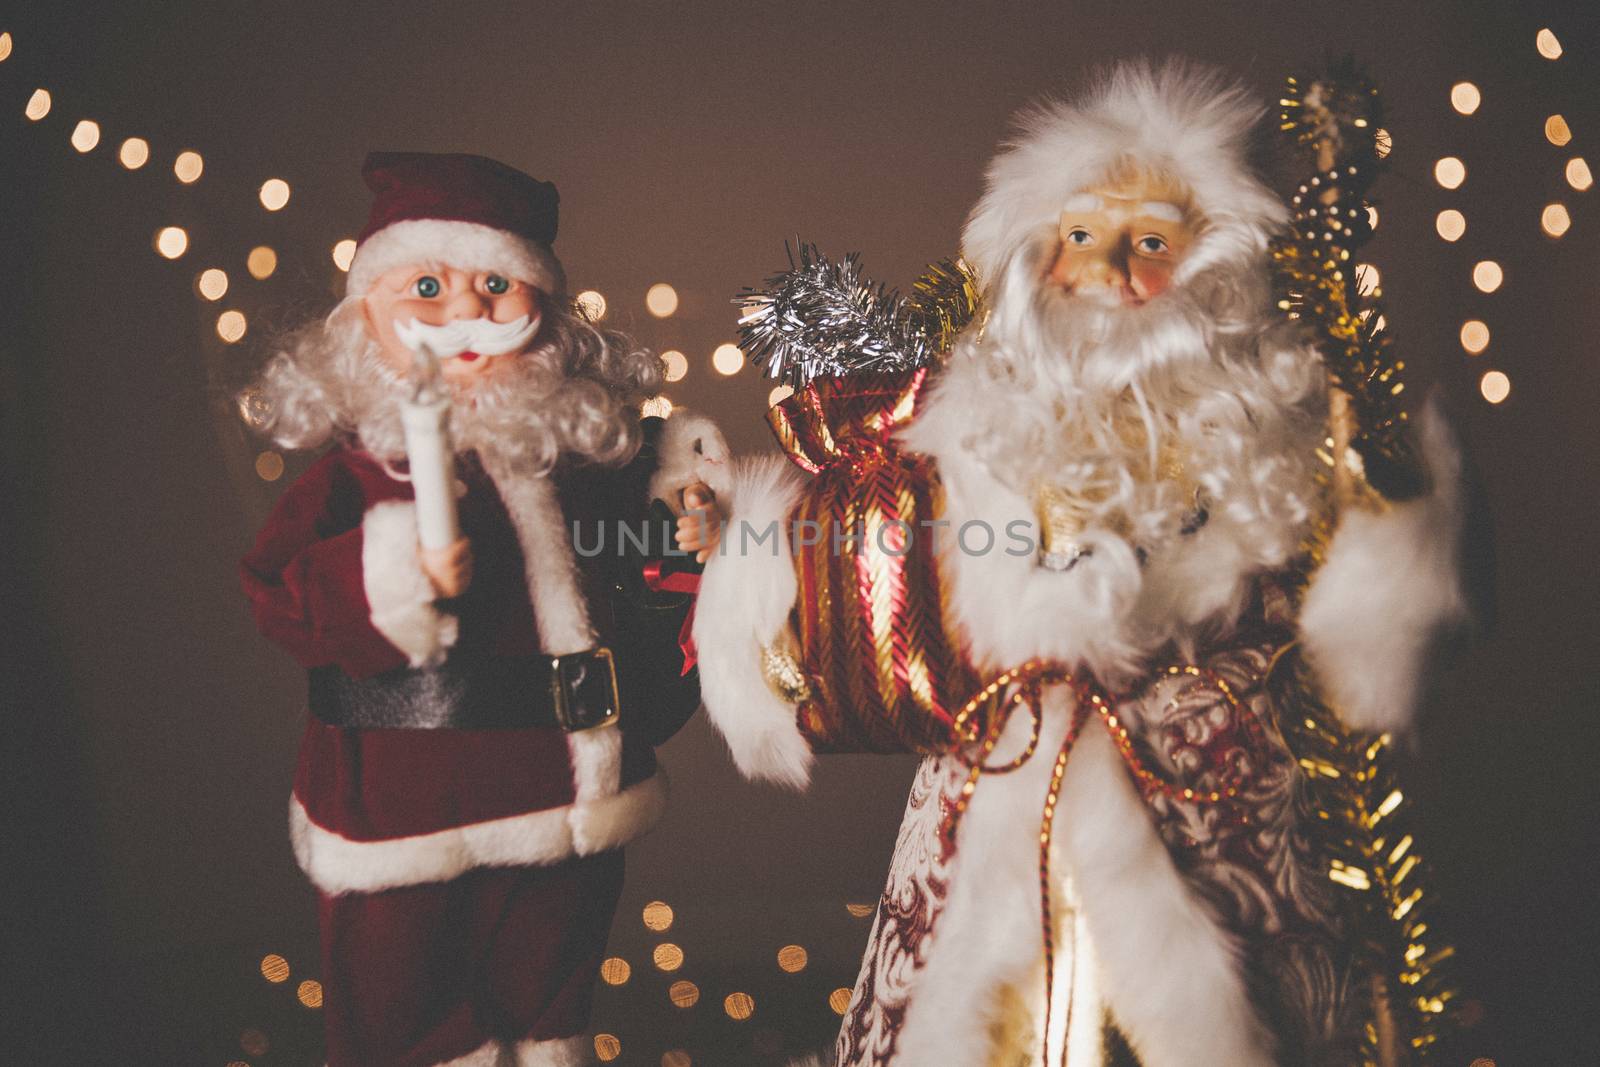 Father Frost and Santa Klaus figurines together, New Year 2019 by mi_viri